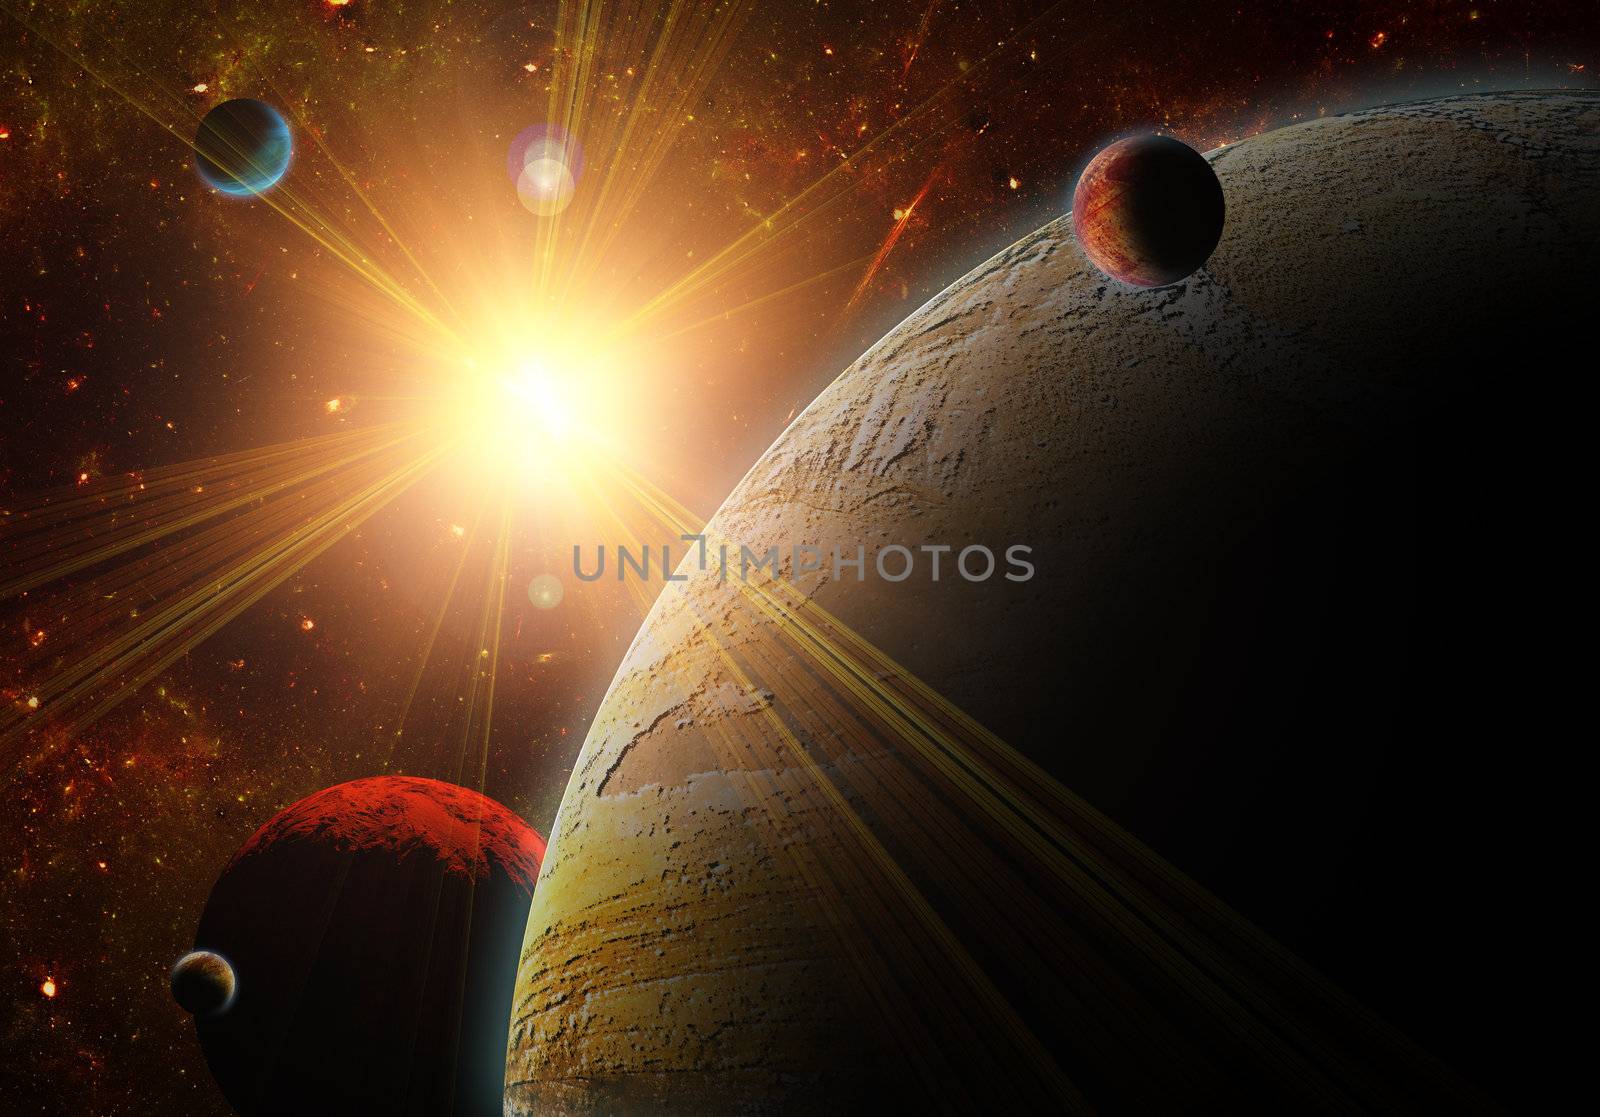 A view of planet, moons and the universe from the earth surface. by mozzyb